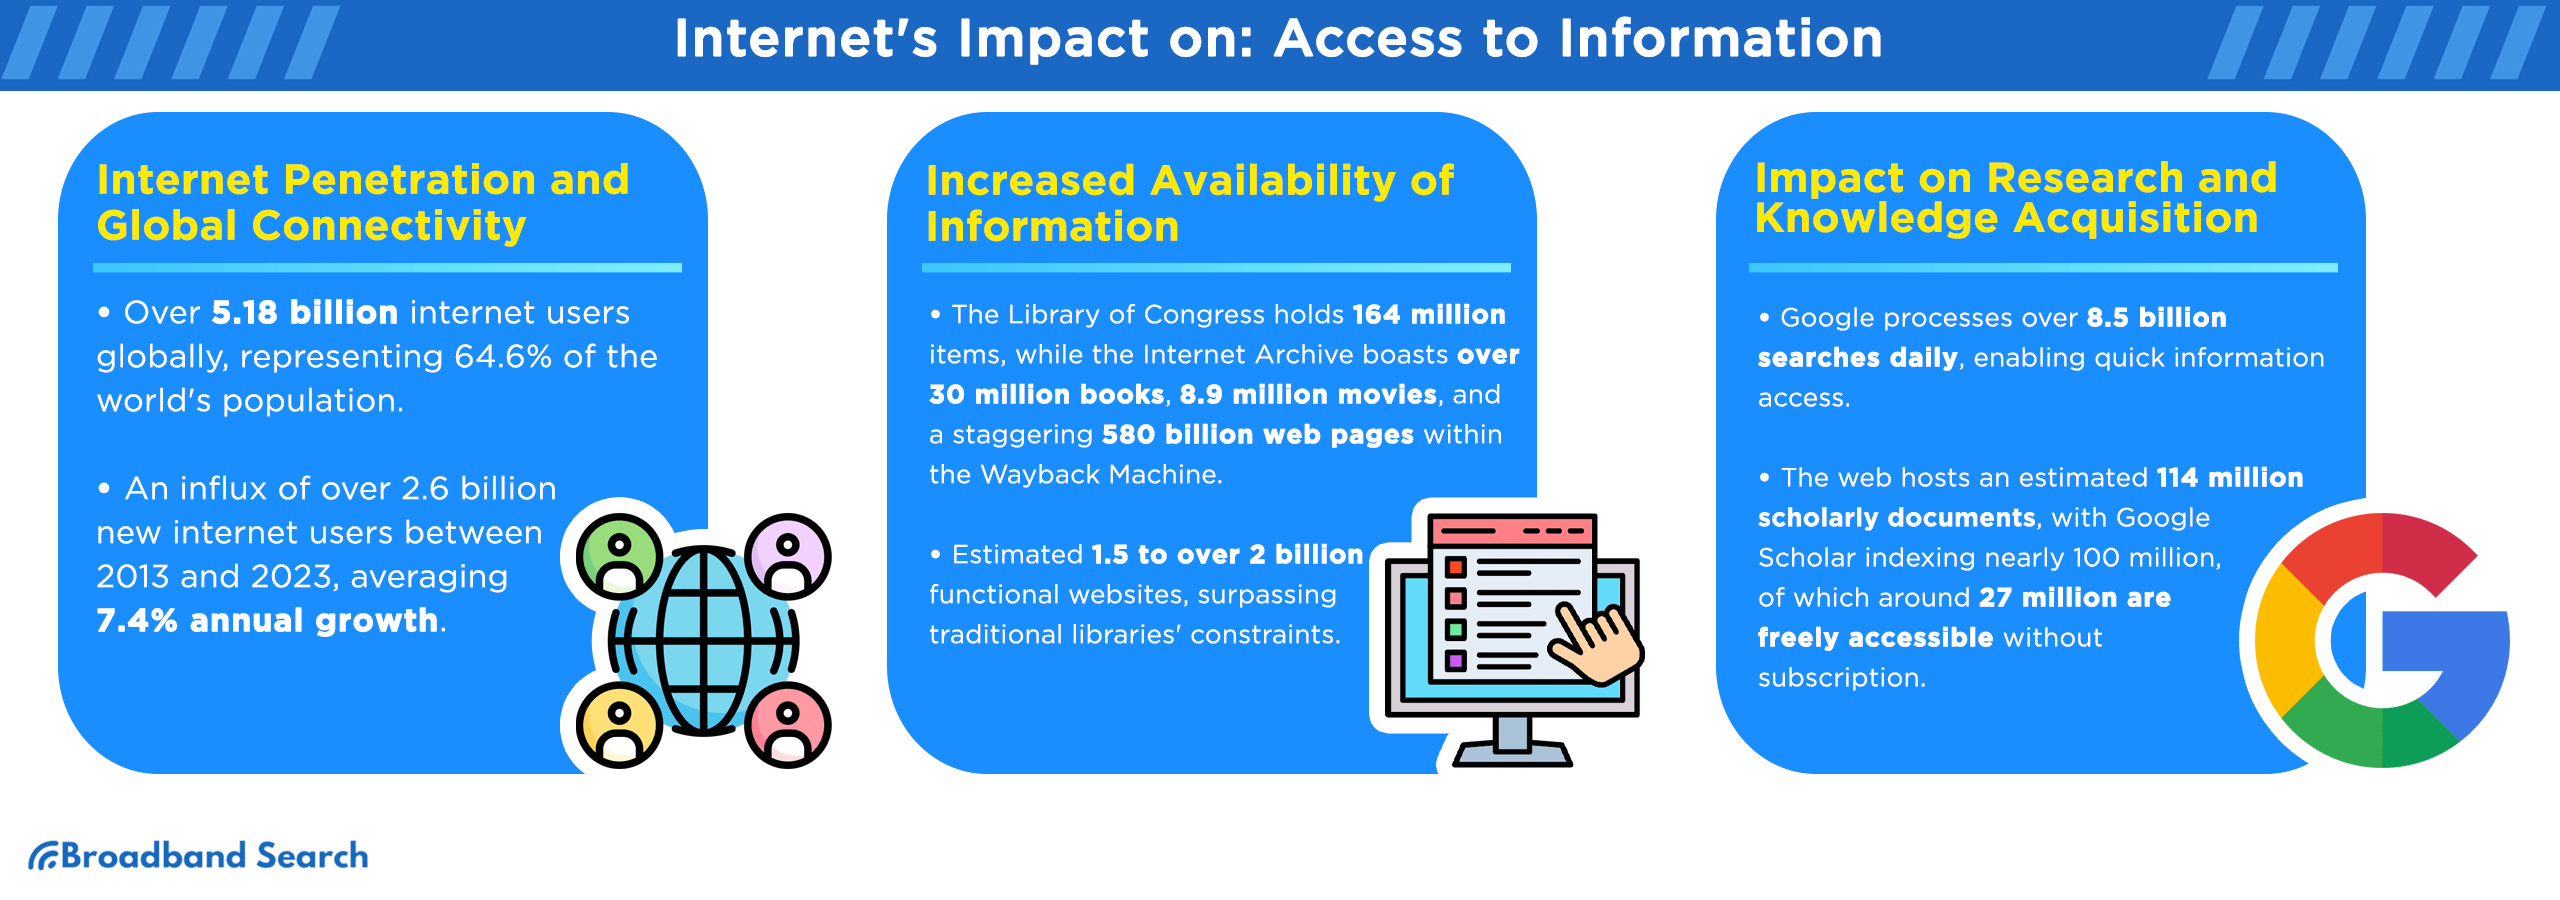 Internet's impact on access to information